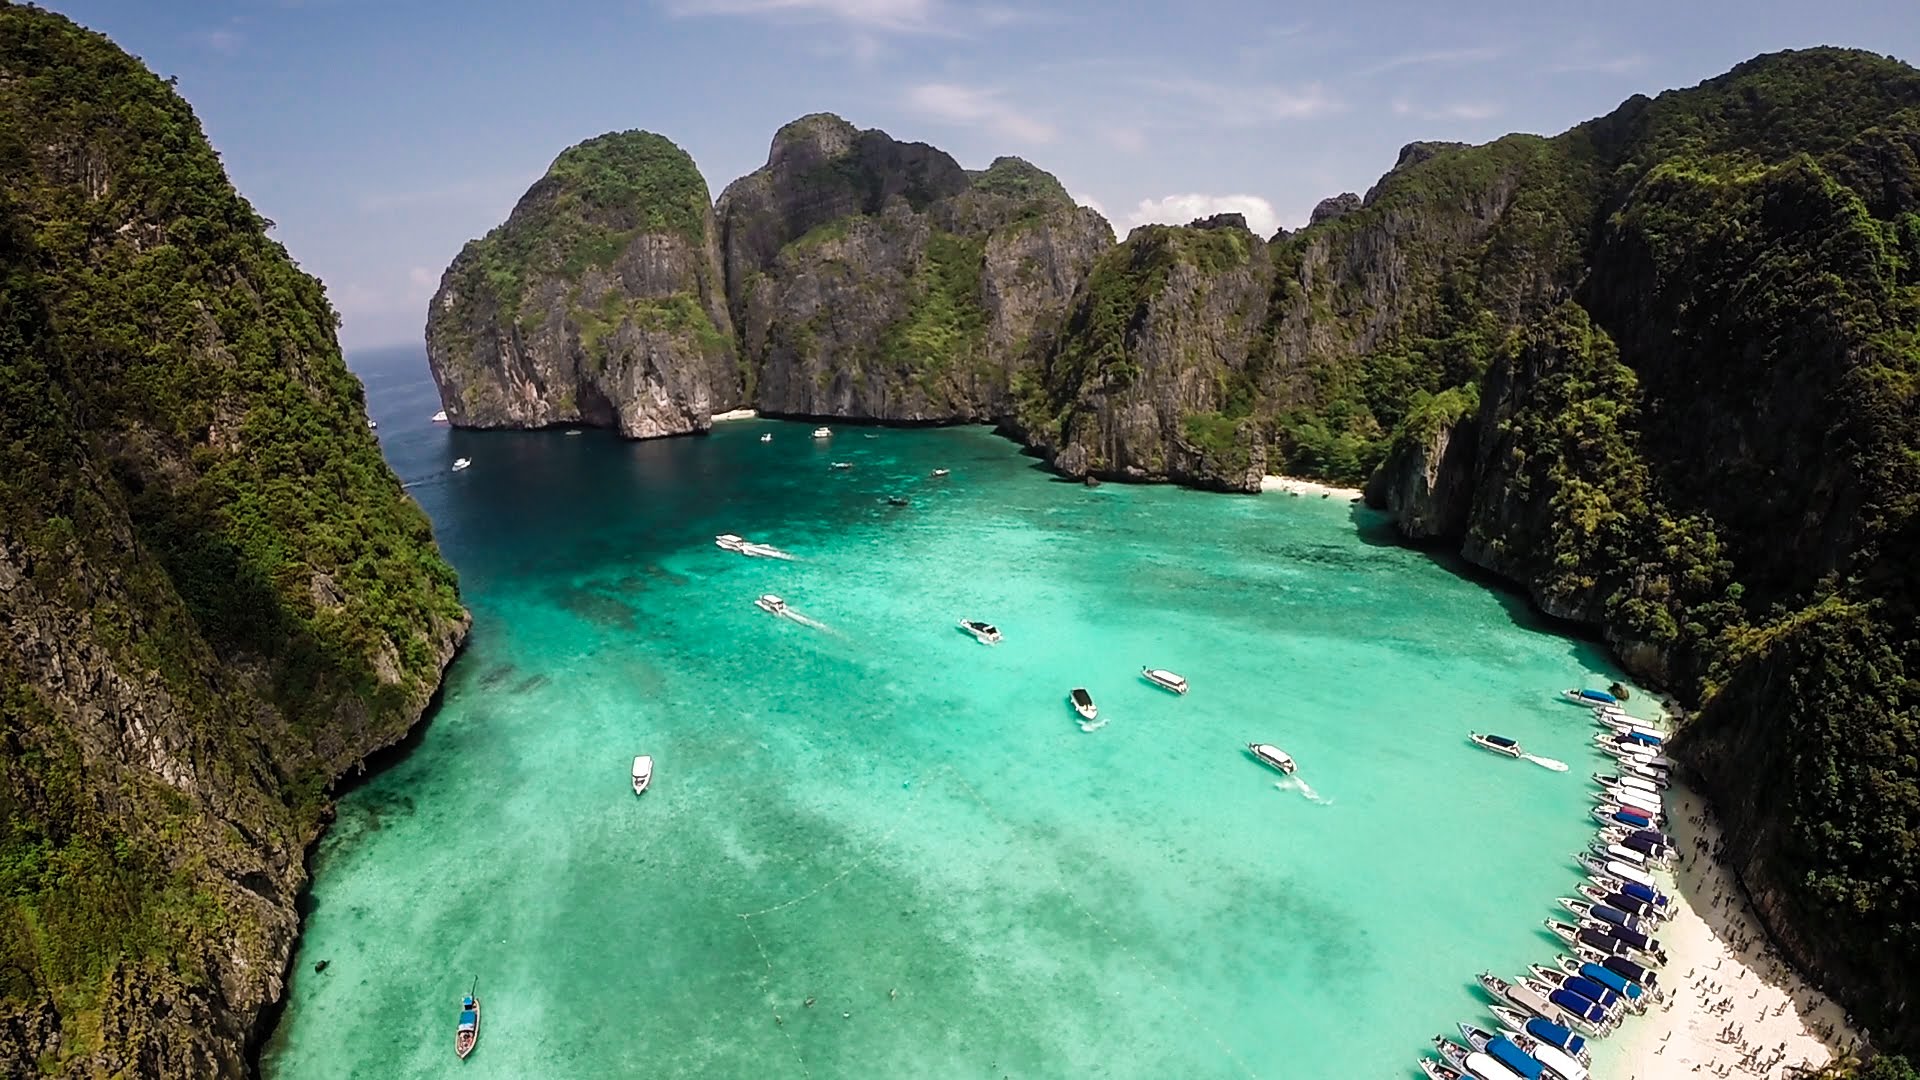 The Top 10 best islands in 2016 according to Trip Advisor